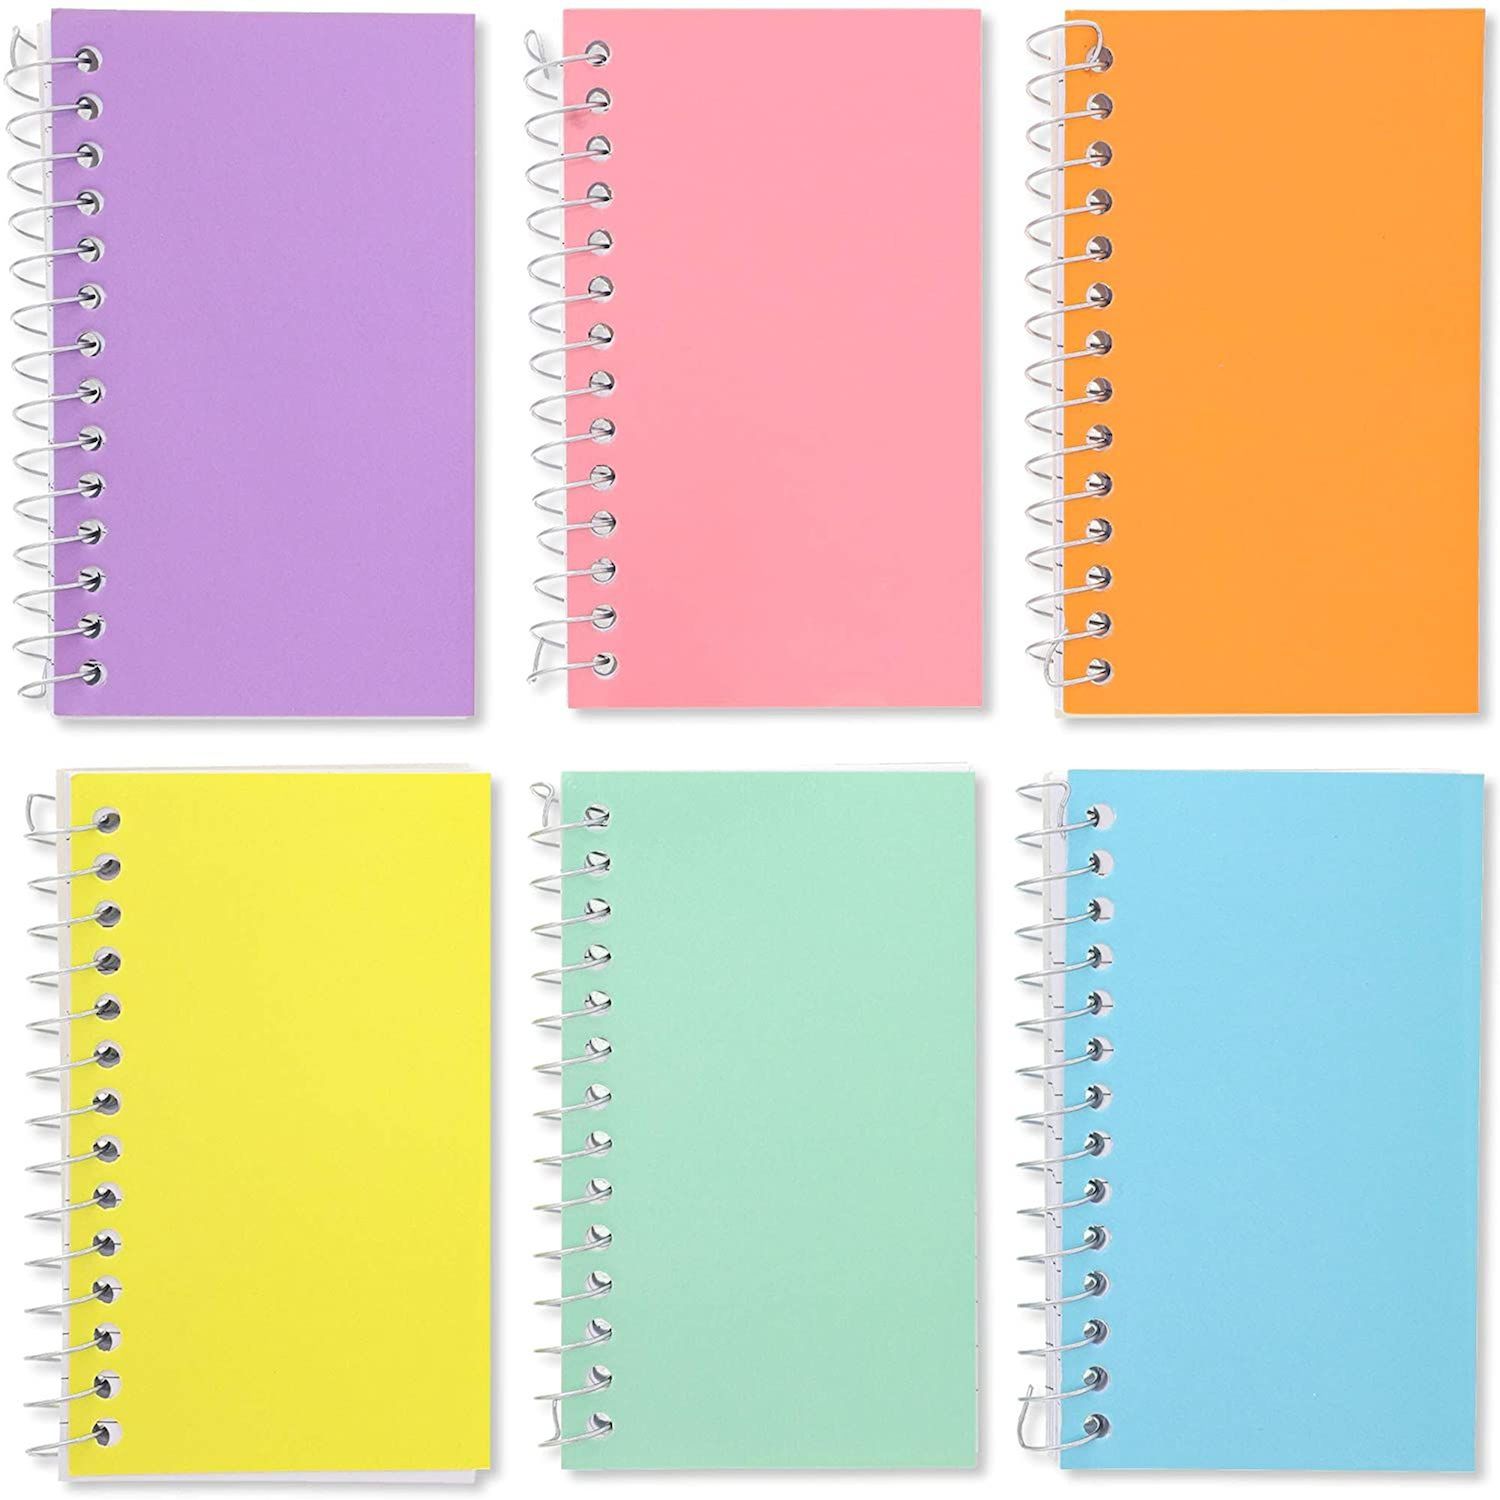 2 Pack Spiral Notebook Journals for Women, A5 Size 5.7X 8.5 Inches